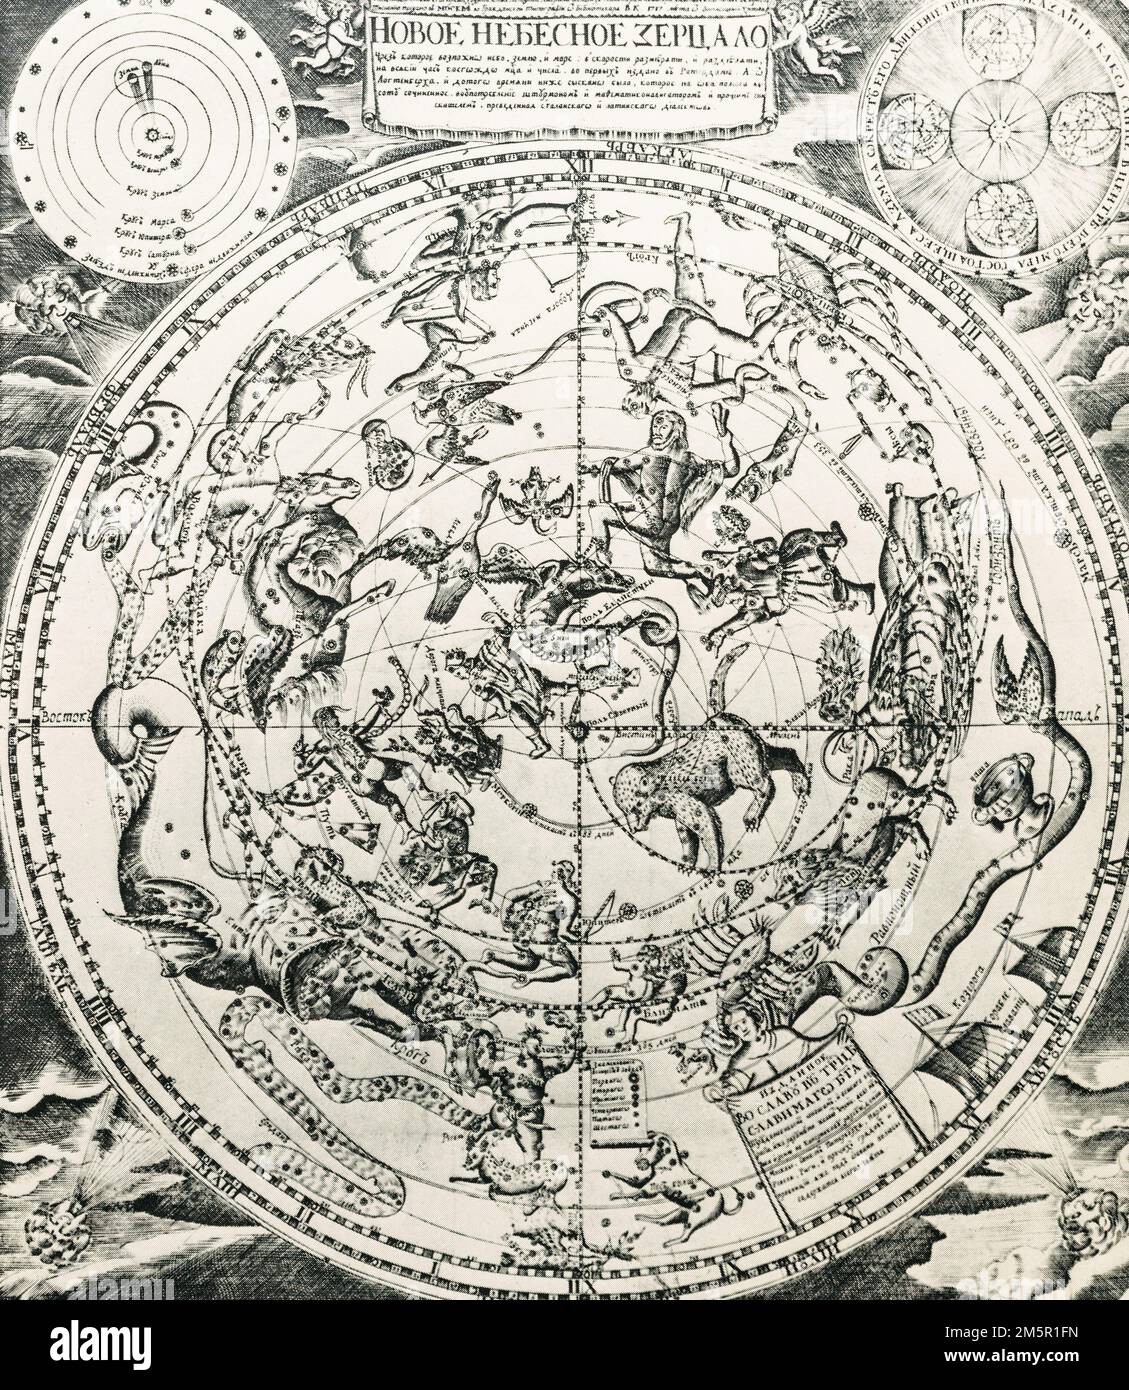 New Celestial Mirror With Scheme Of Motion Of Planets According To Heliocentric Theory Of Copernicus, 1717. Training Table. Stock Photo